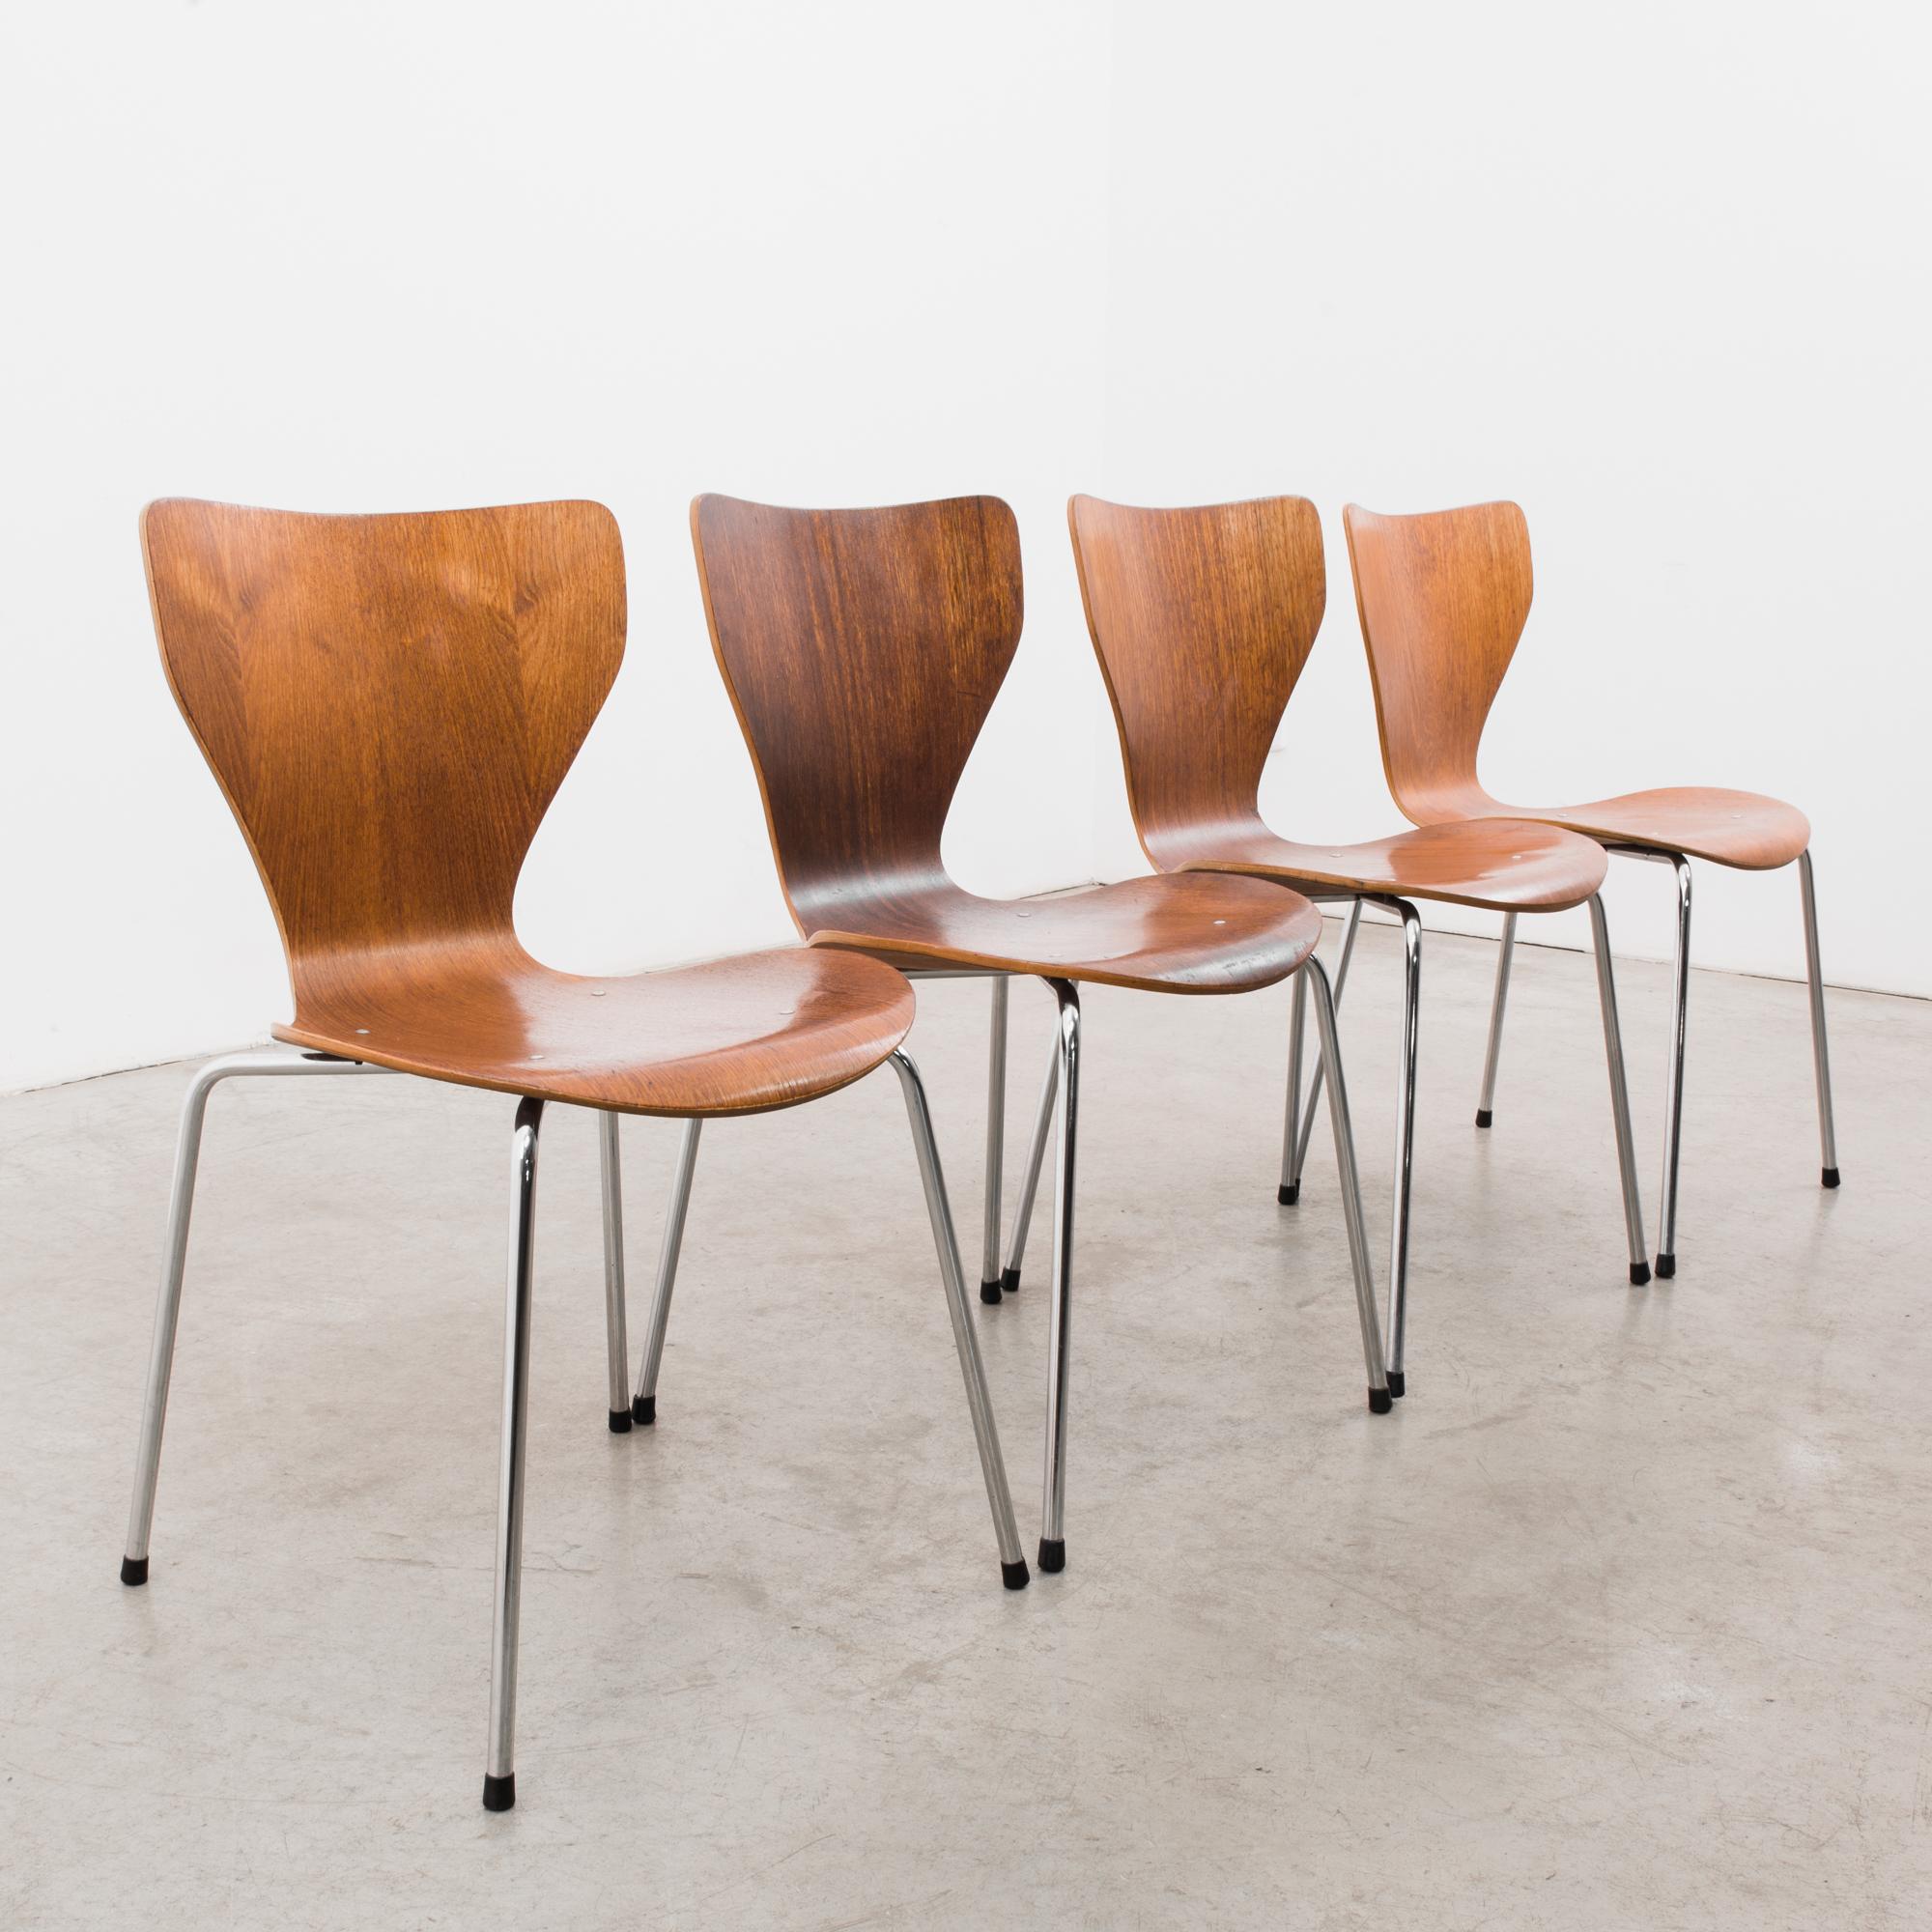 A set of four wooden dining chairs from Denmark, circa 1970. A modern, abstract design; a seat of bent plywood sits upon four slender silver legs. The plywood’s thinness contrasts with the fullness of the silhouette it creates, a fluid, wasp-waisted